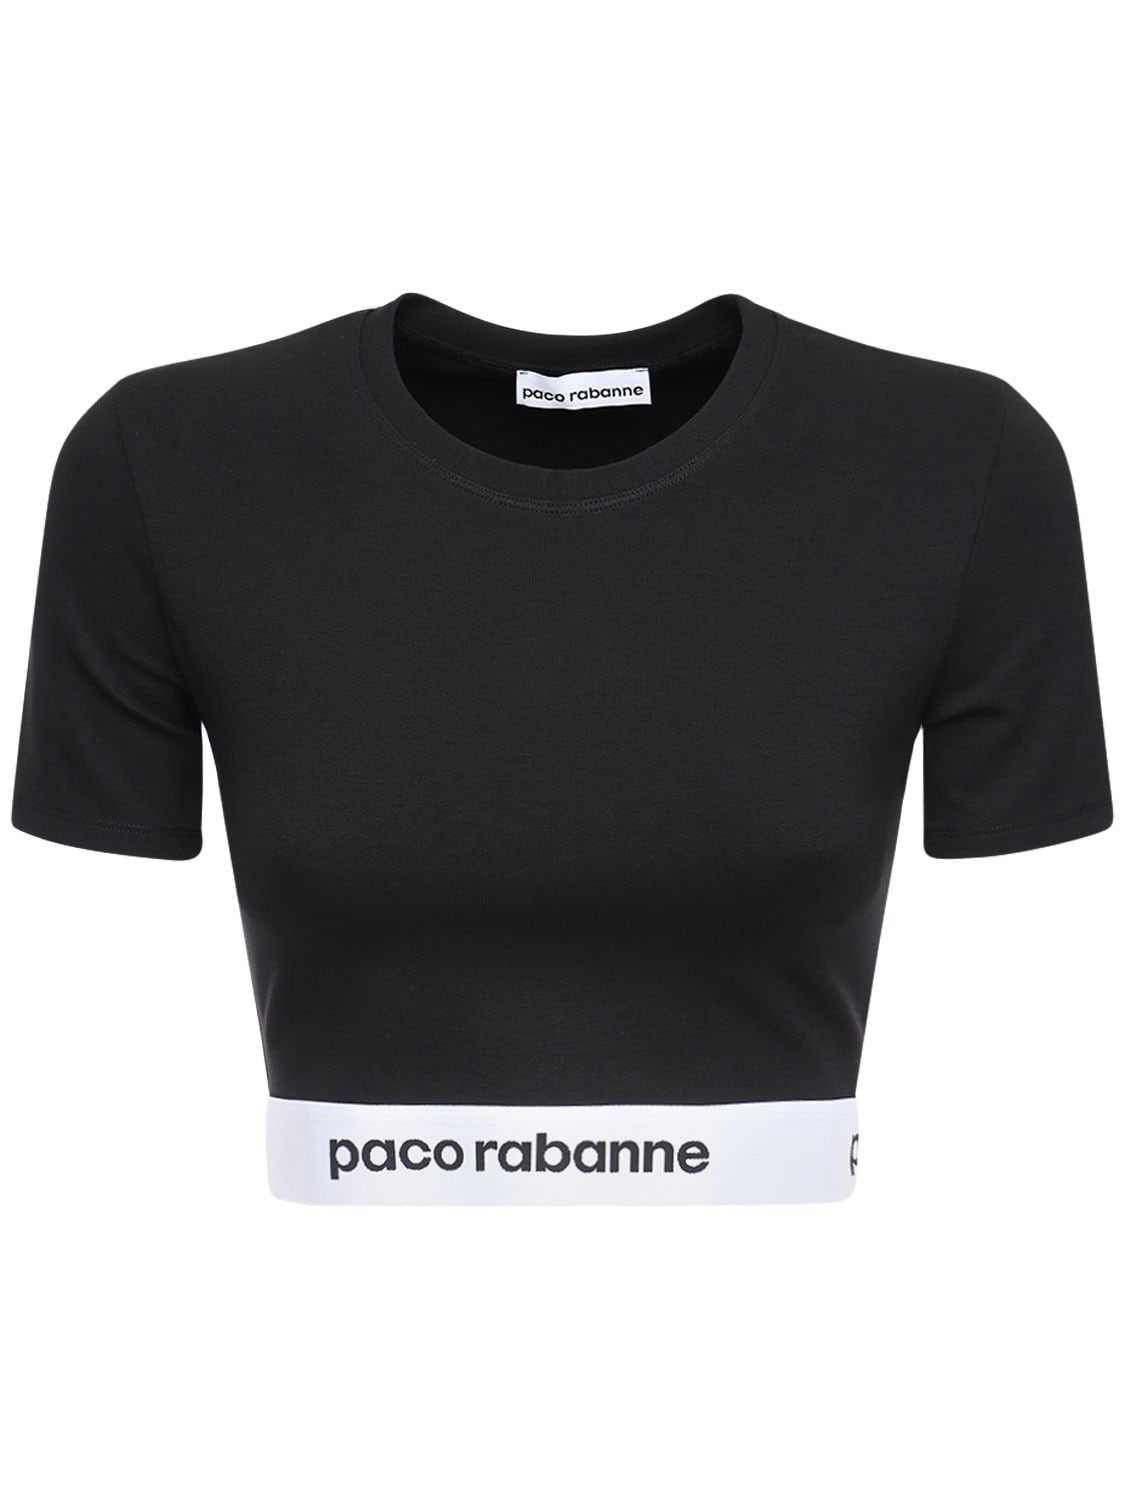 Paco Rabanne Black Cropped Active Logo Sport Top In P001 Black | ModeSens